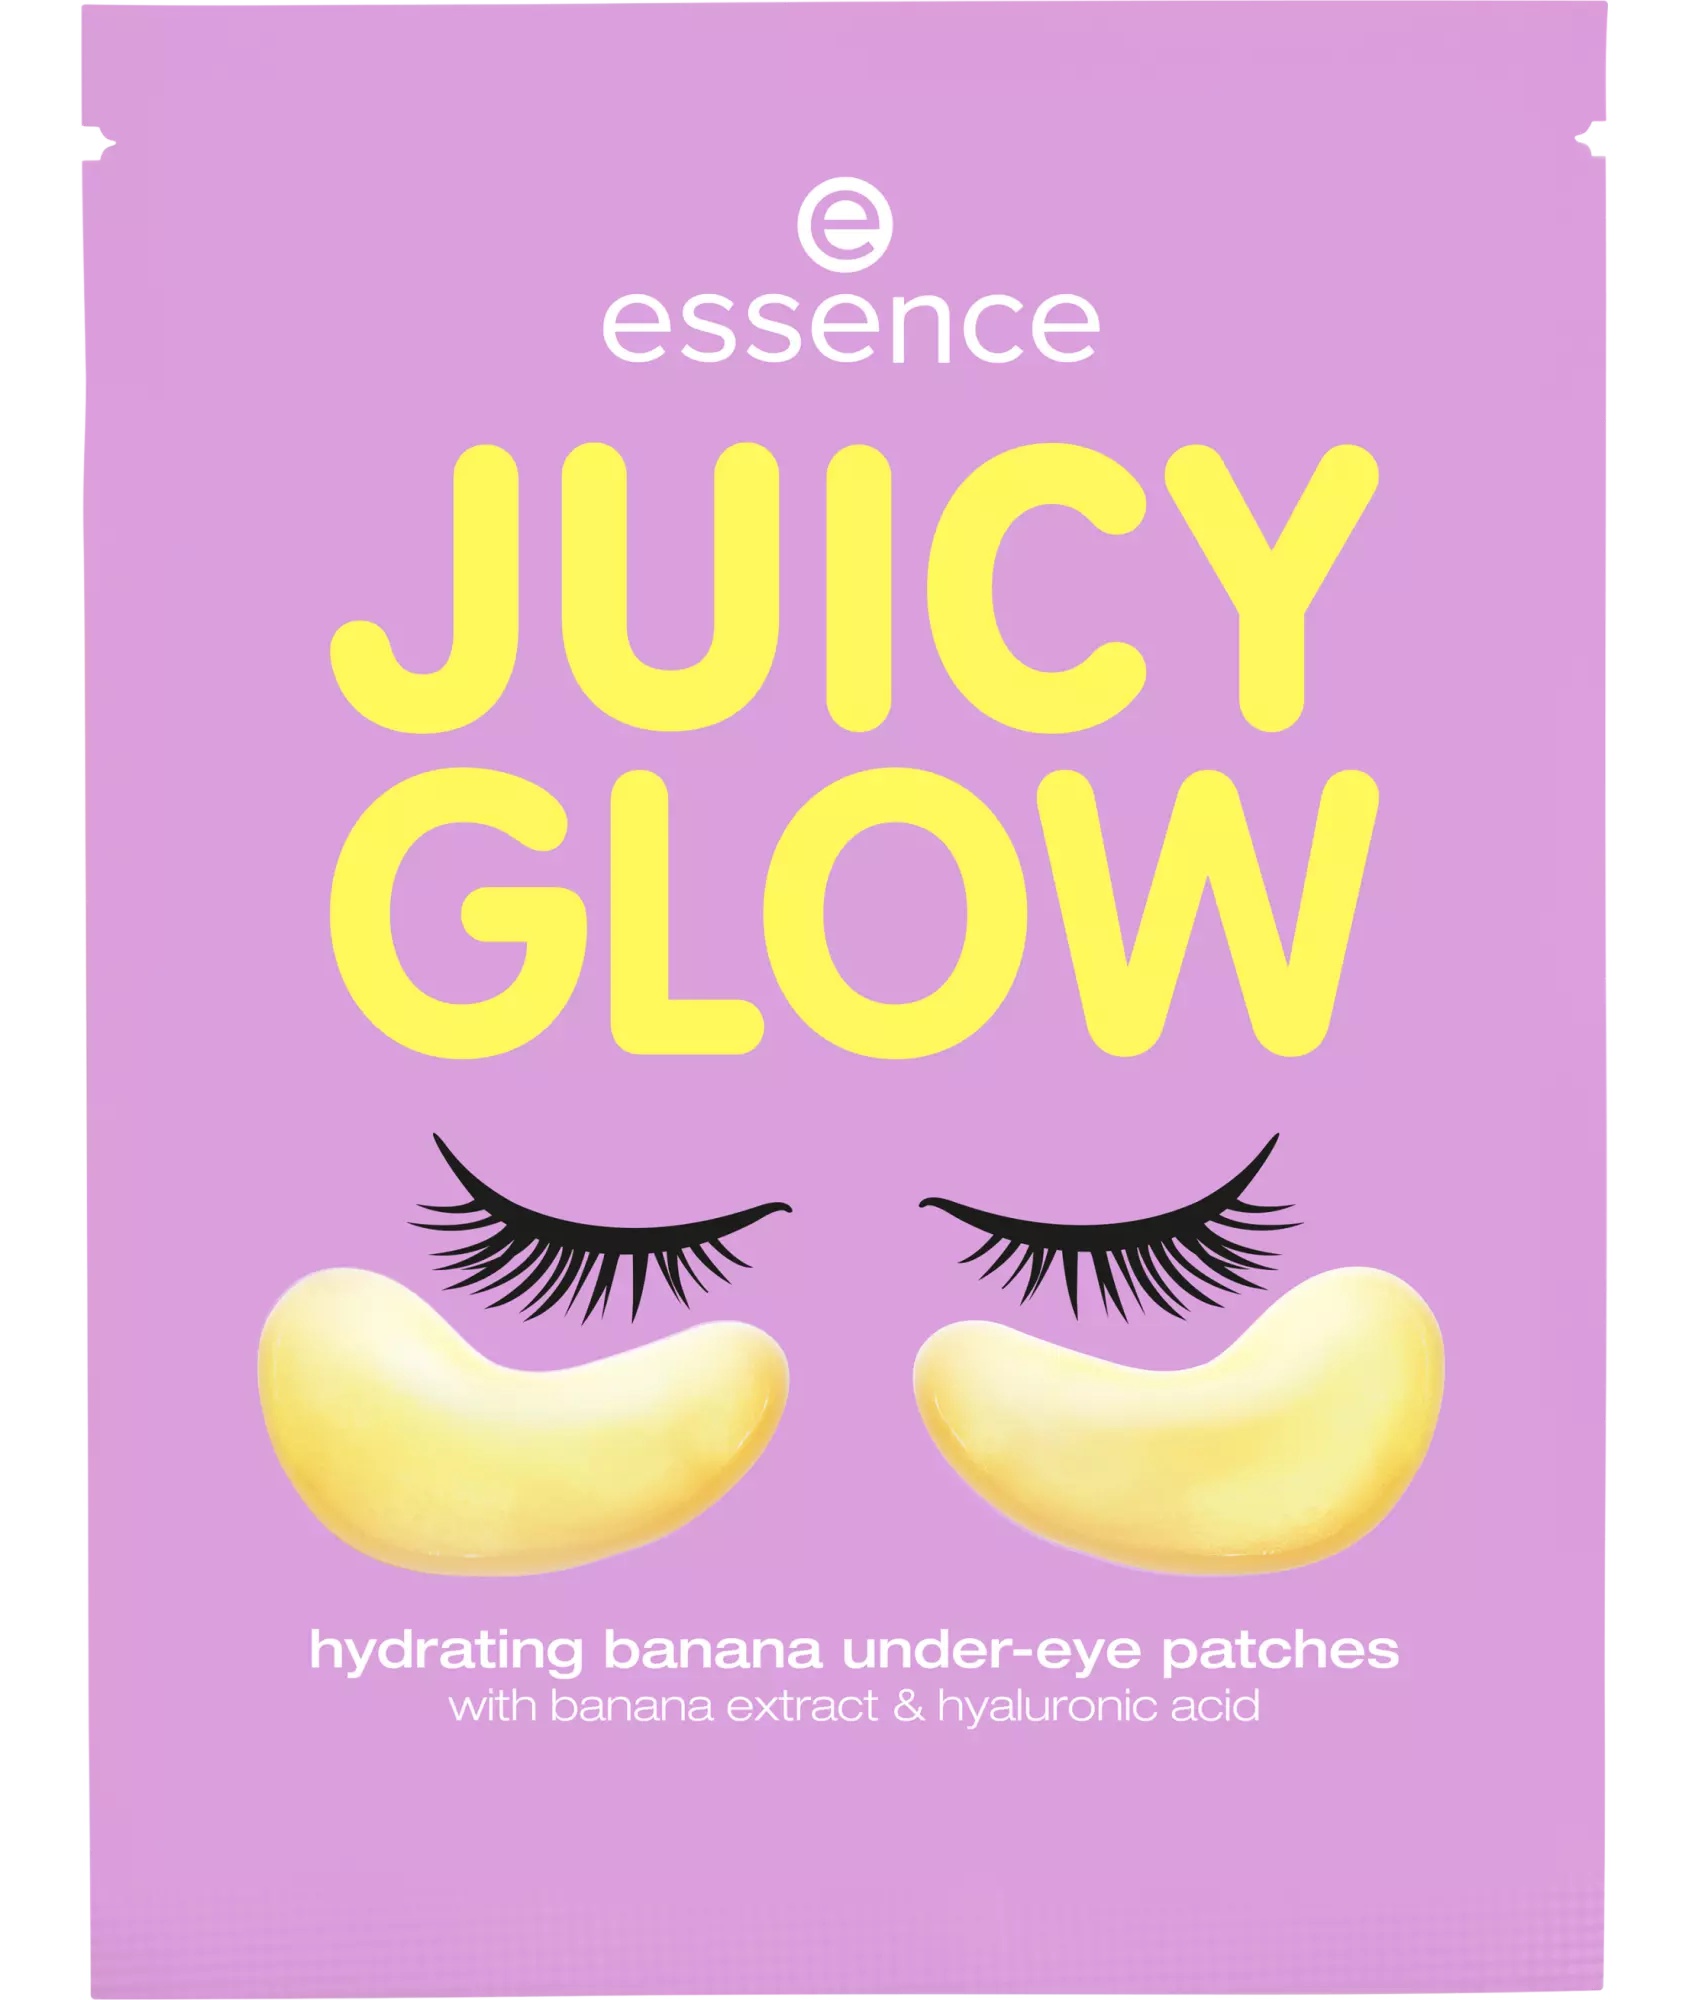 Essence Juicy Glow Hydrating Banana Under-Eye Patches